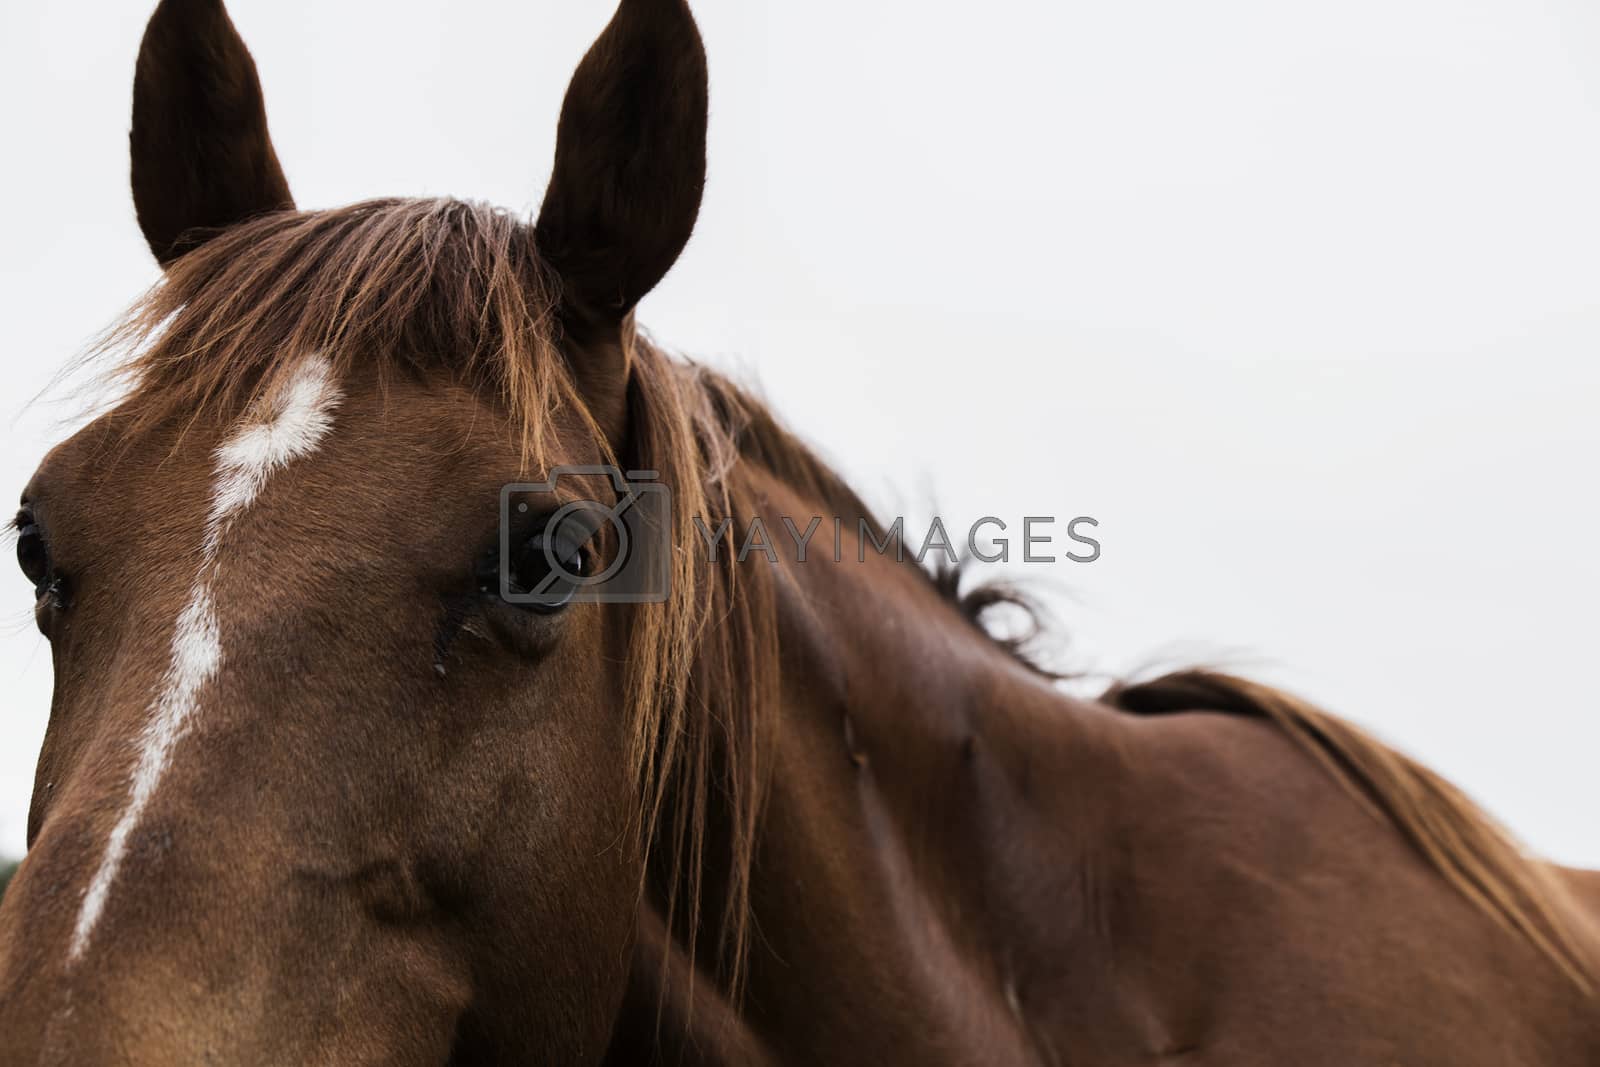 Royalty free image of Australian horse in the paddock by artistrobd